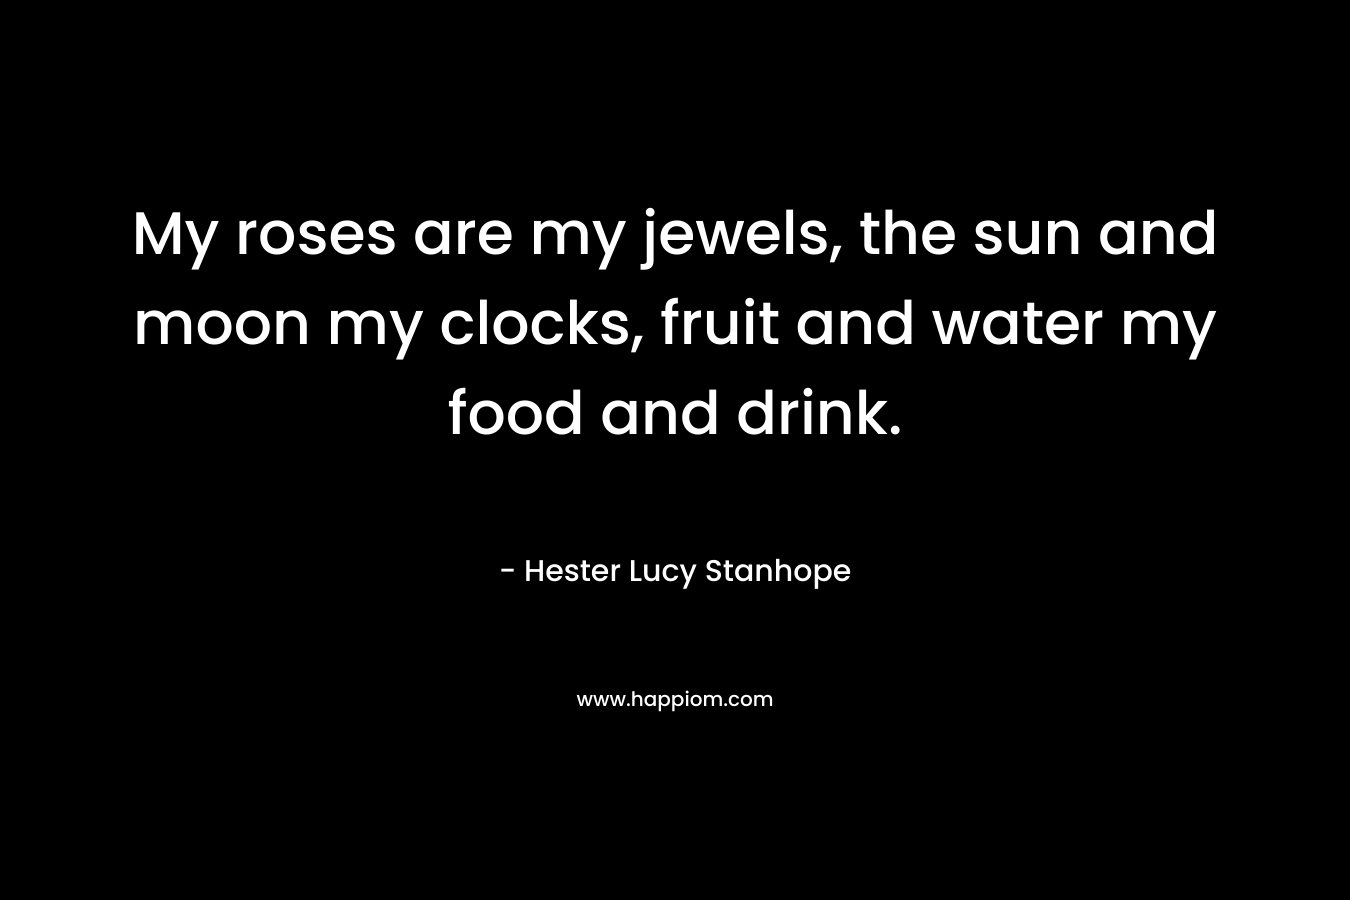 My roses are my jewels, the sun and moon my clocks, fruit and water my food and drink. – Hester Lucy Stanhope